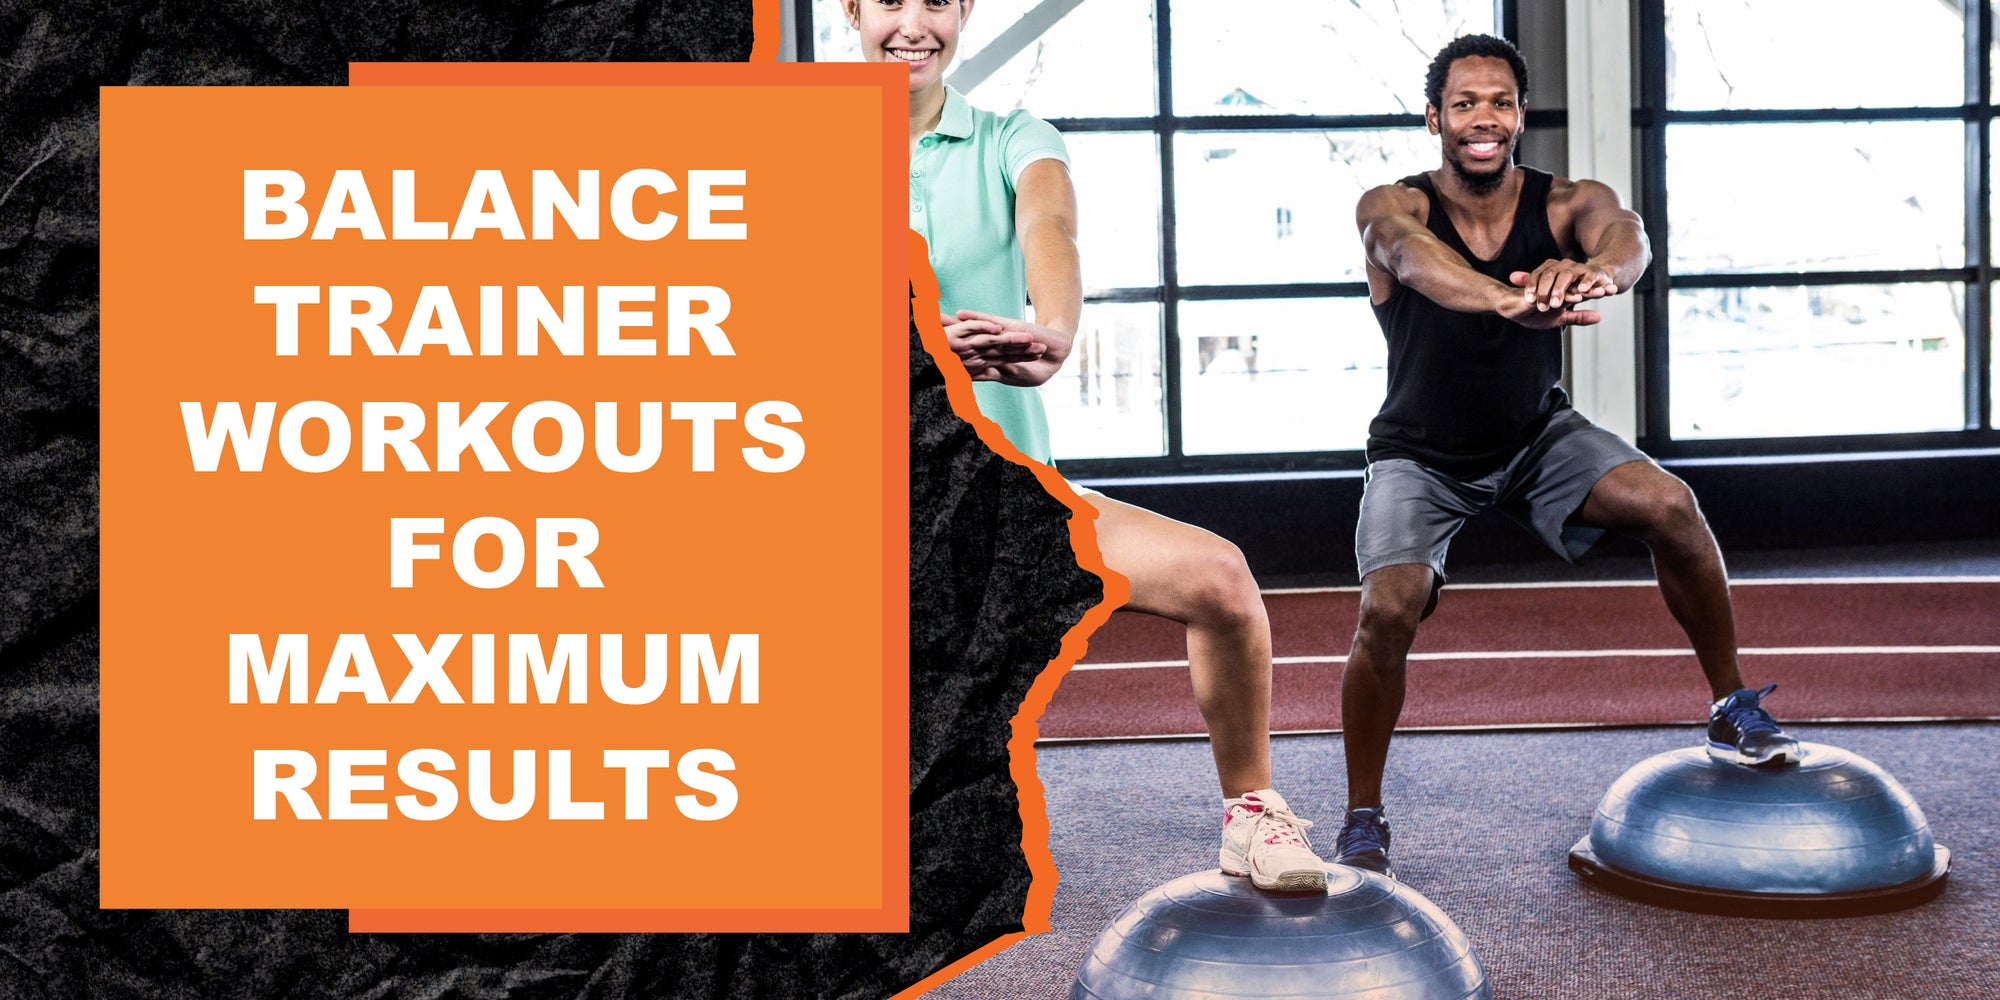 Balance Trainer Workouts for Maximum Results